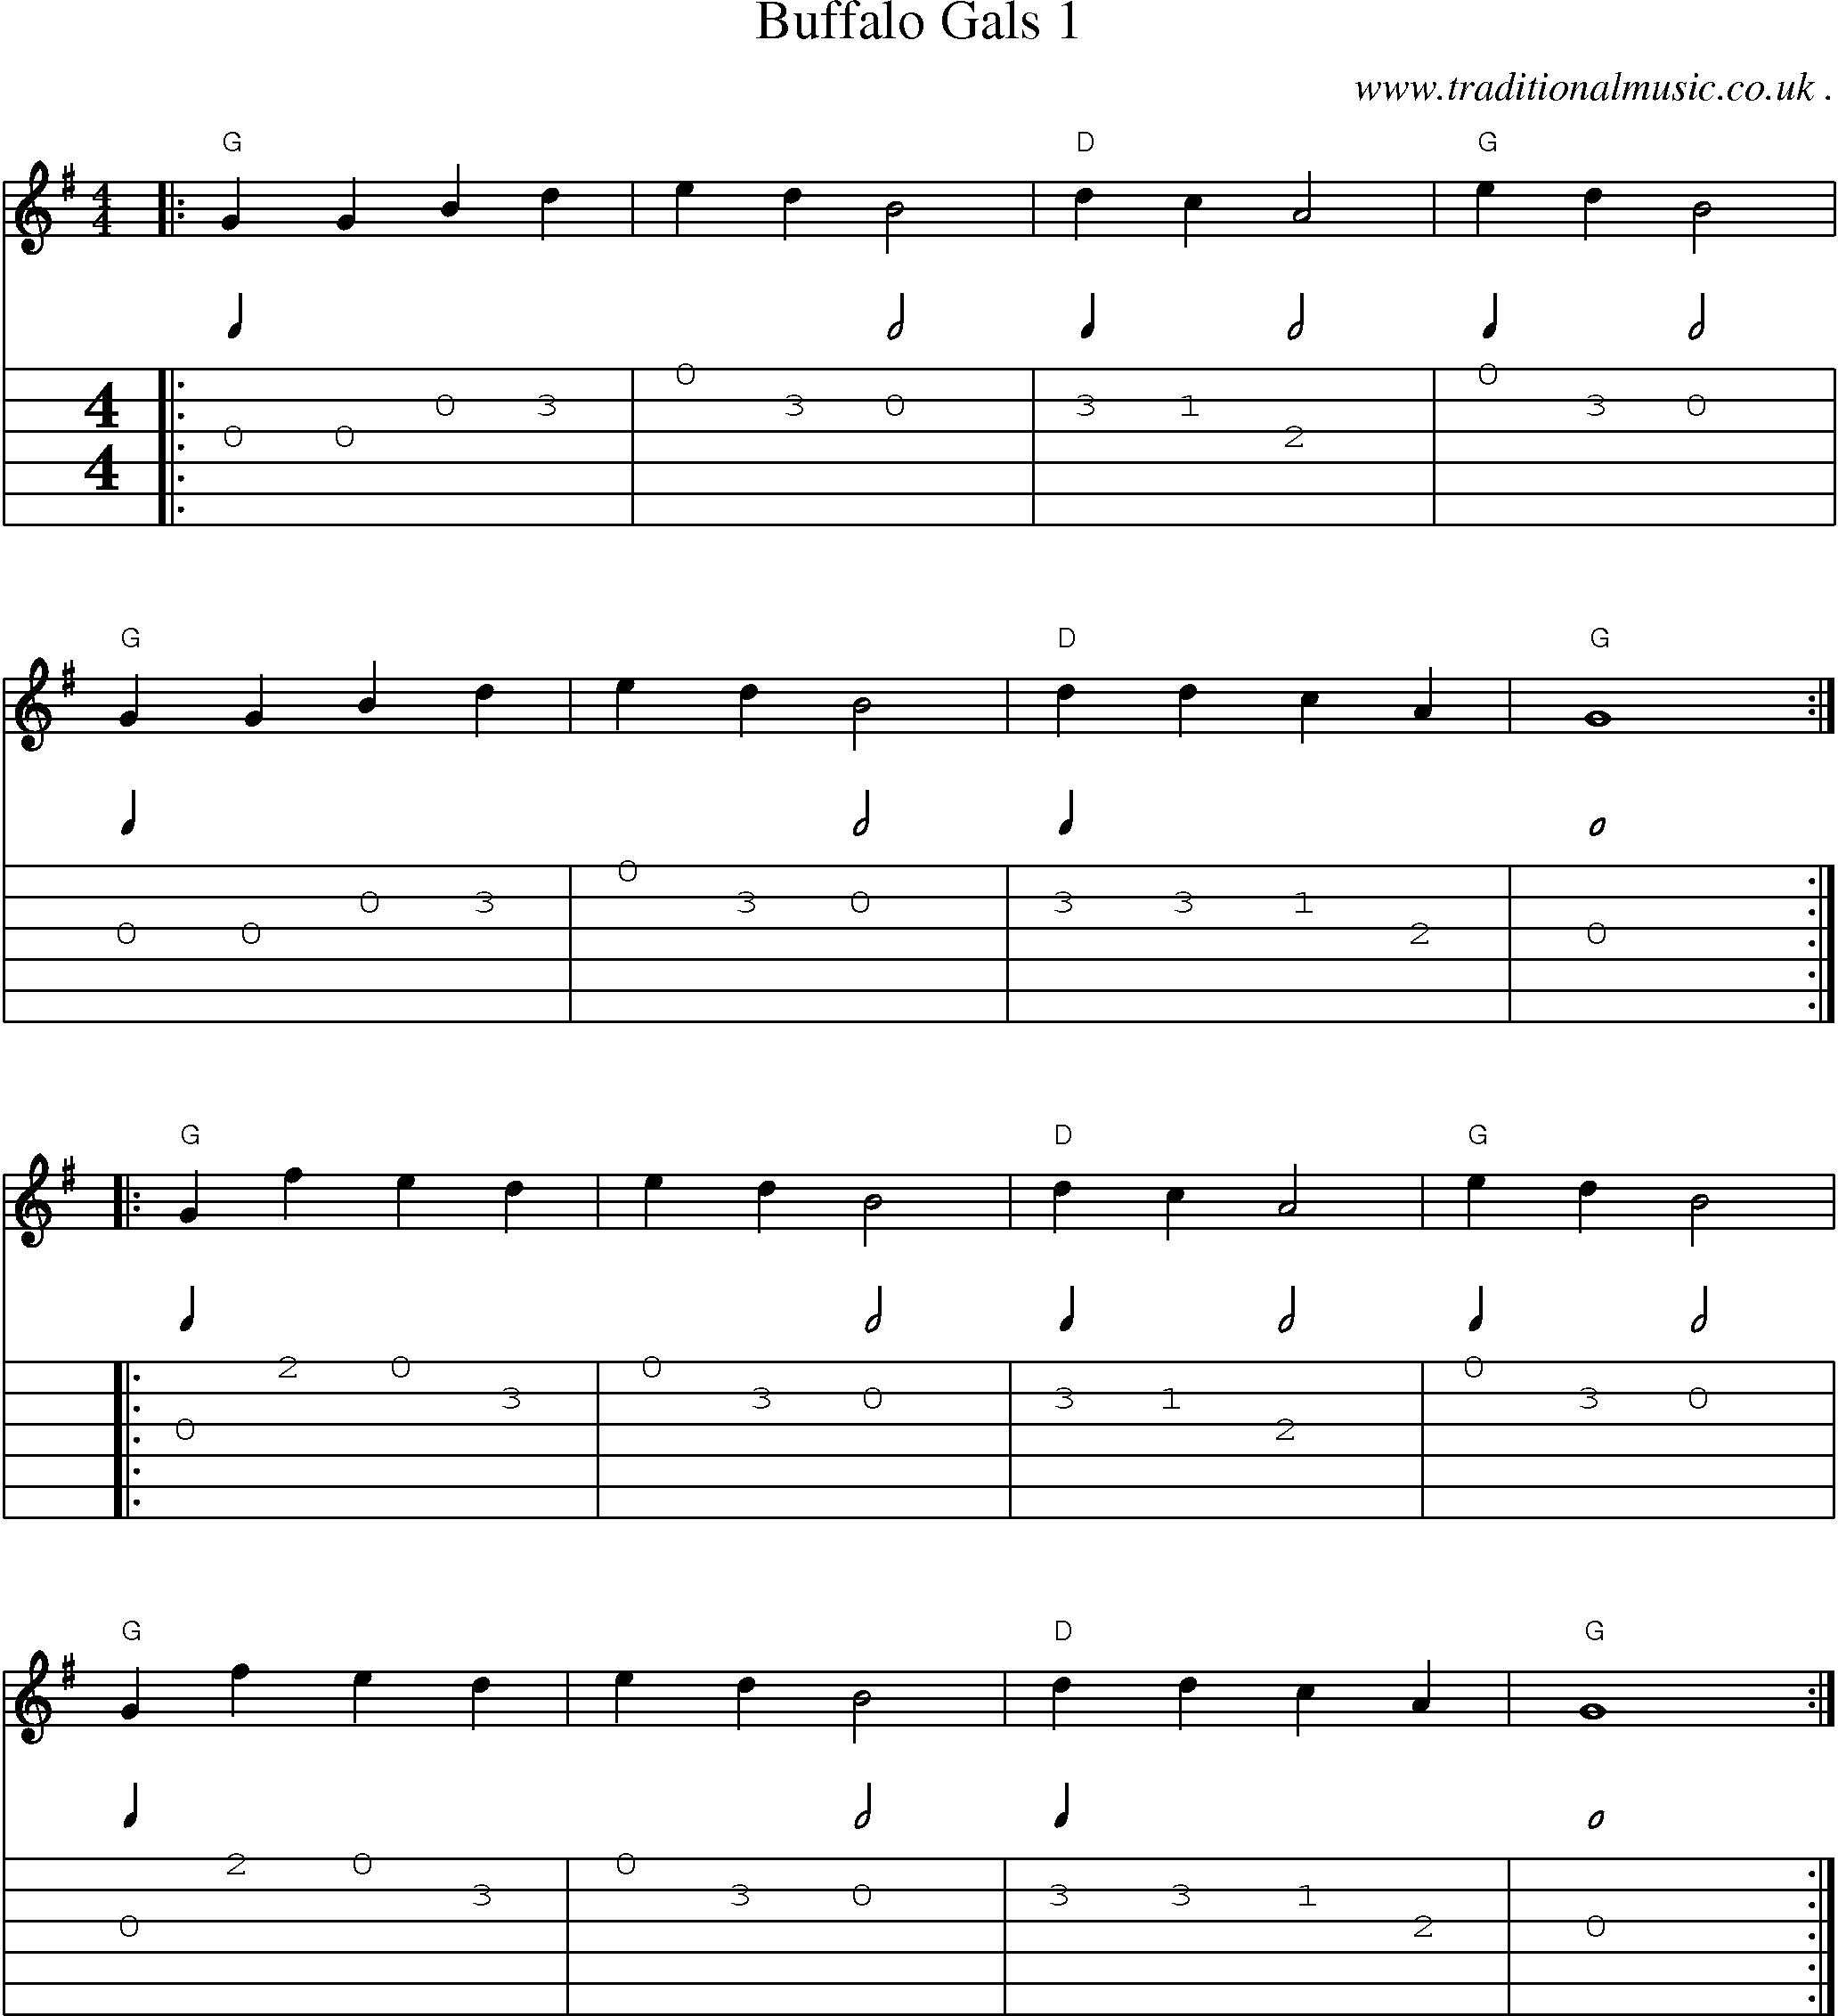 Music Score and Guitar Tabs for Buffalo Gals 1